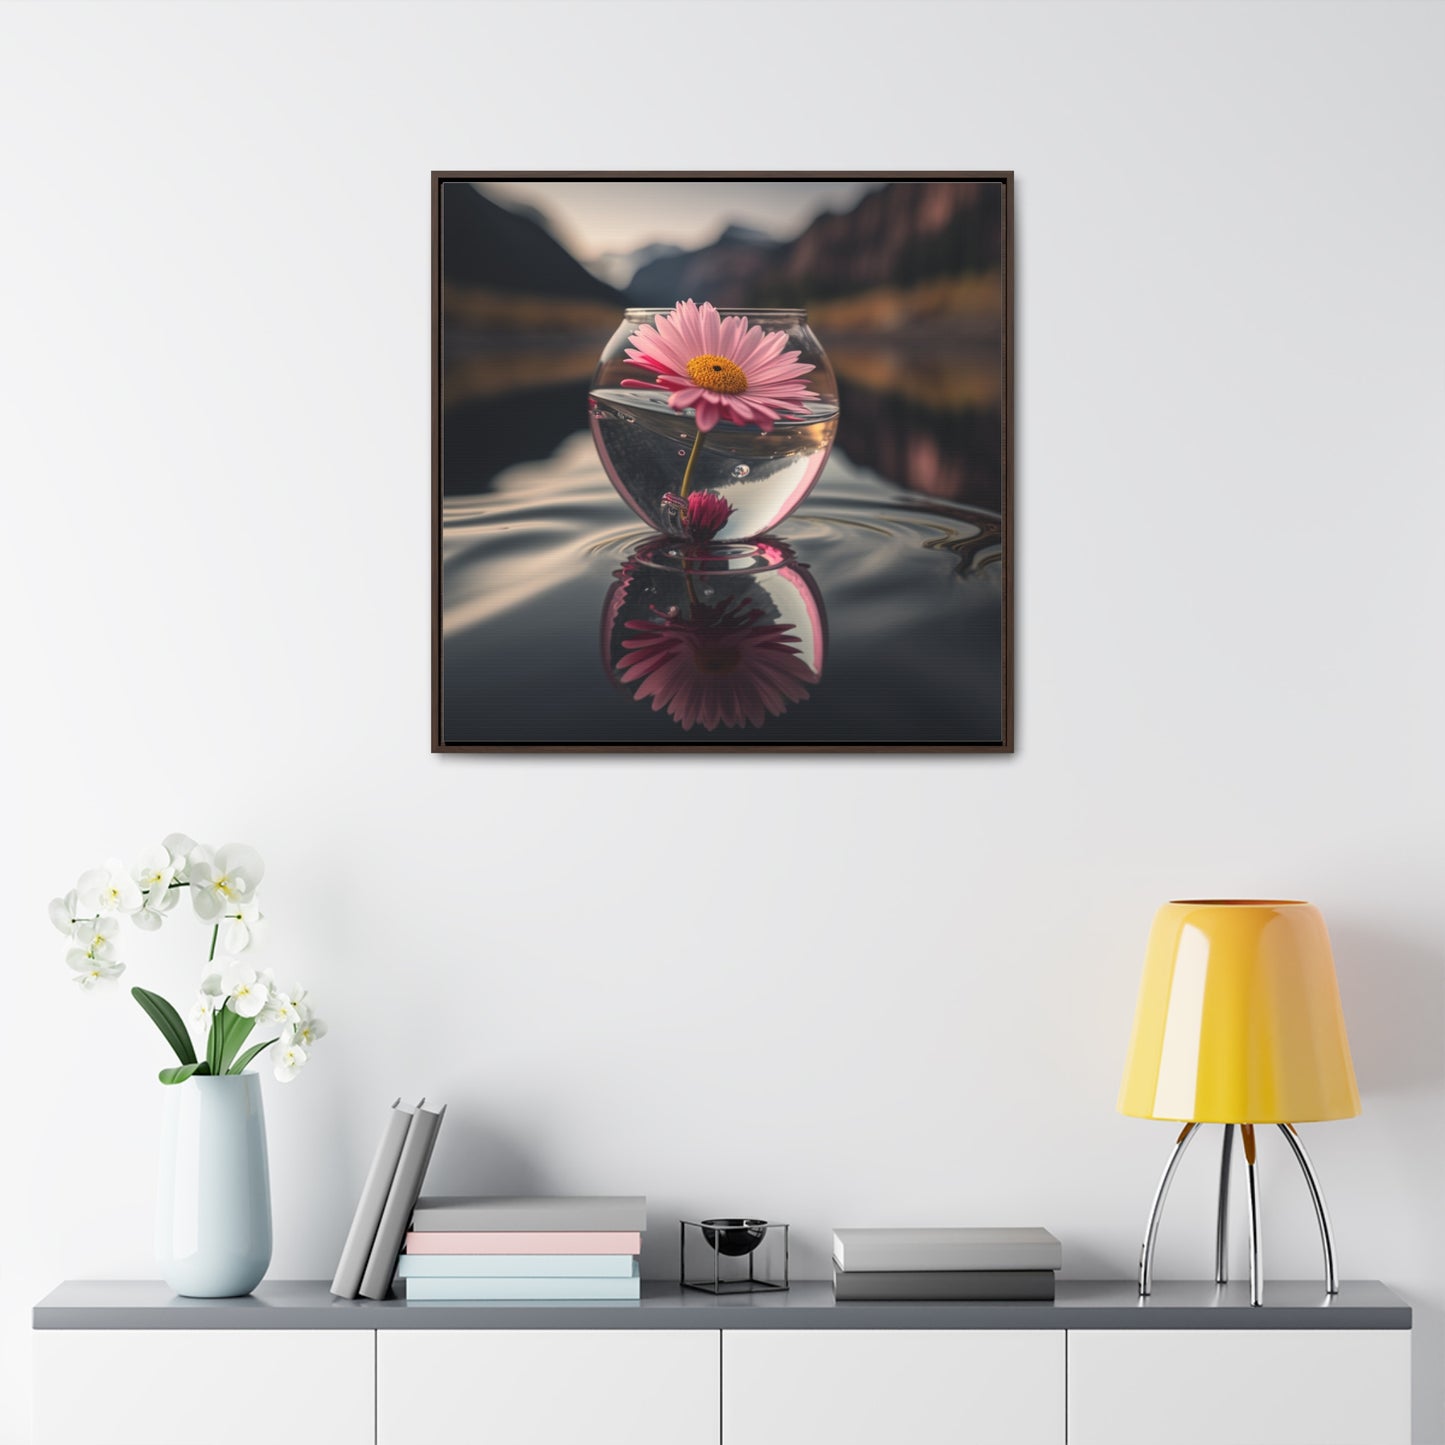 Gallery Canvas Wraps, Square Frame Daisy in a vase 3